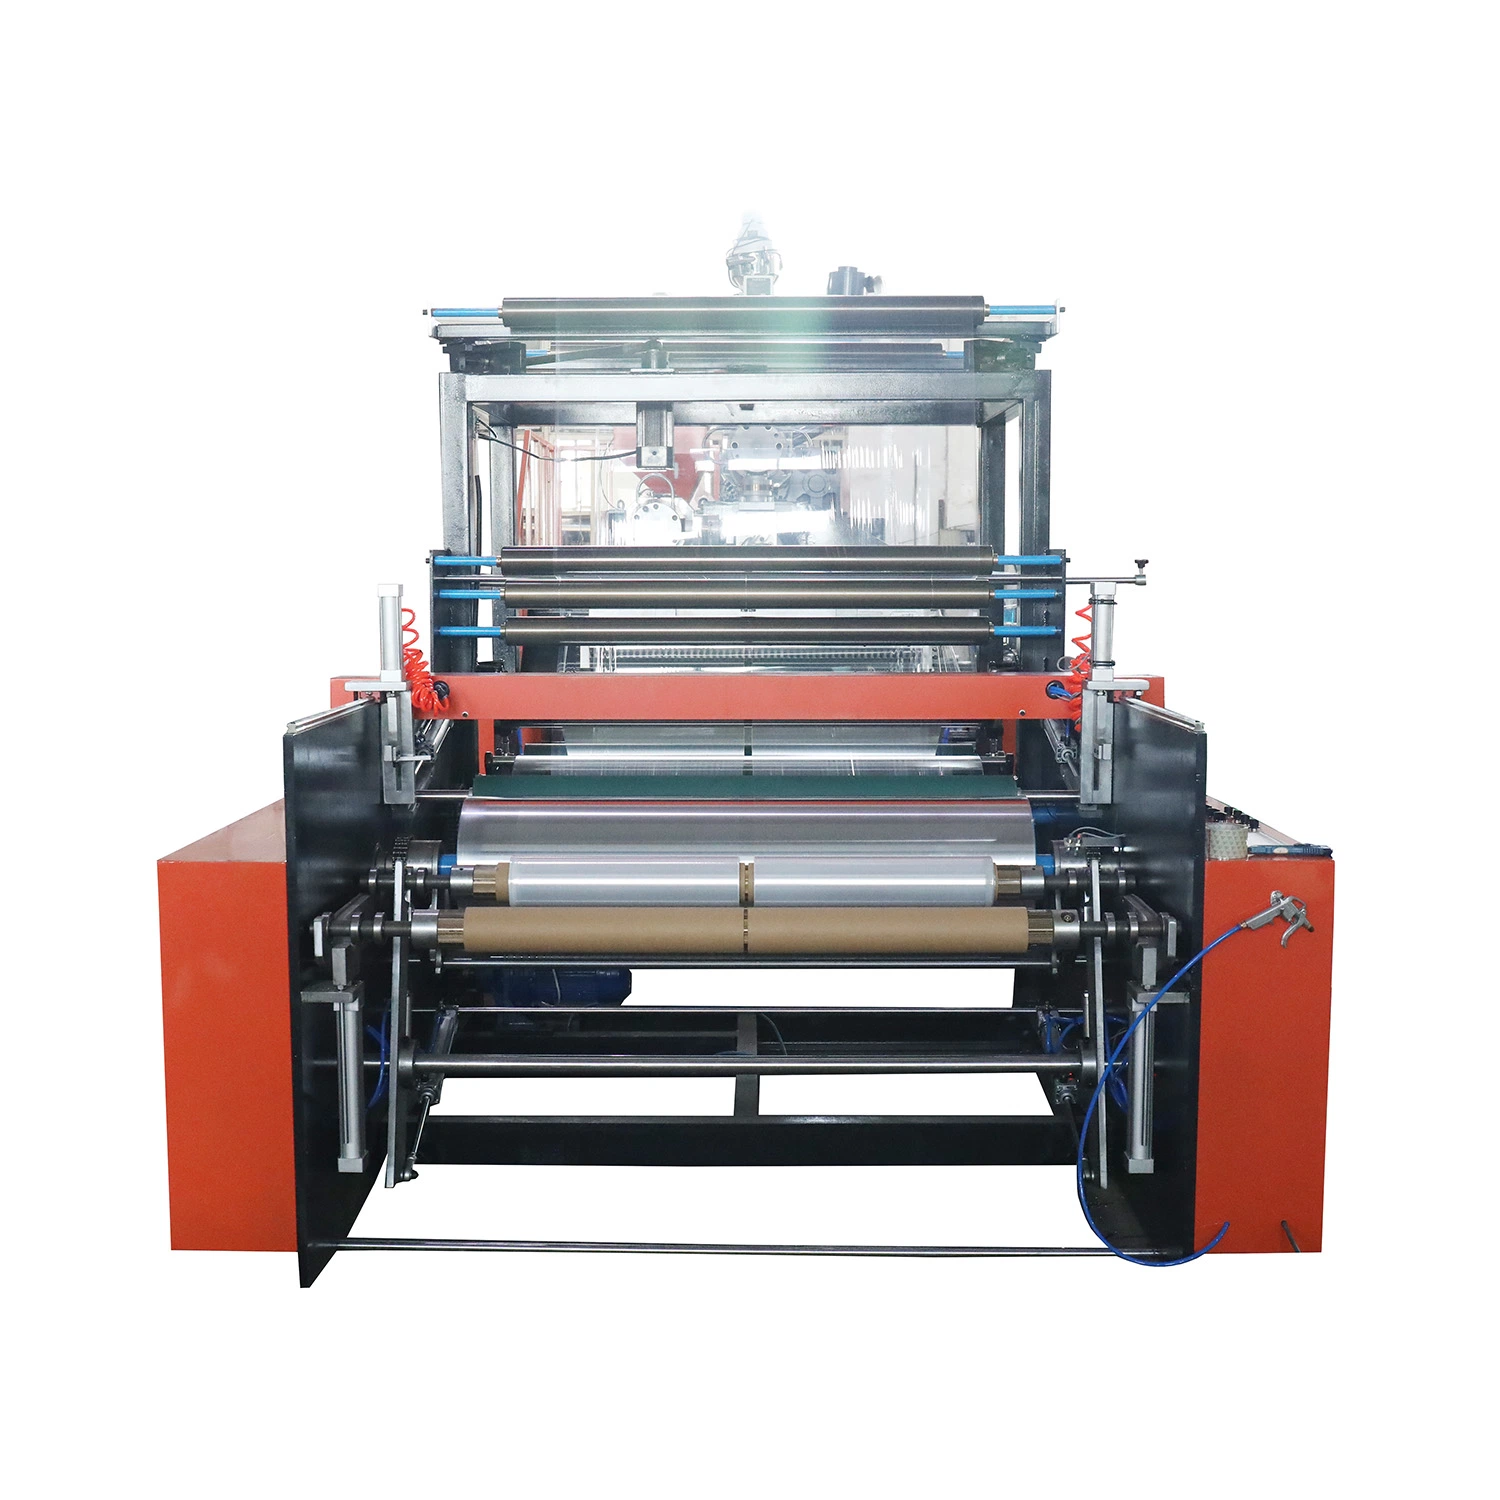 LLDPE PE 500mm-1500mm Single/Double/Three Layer Co-Extrusion Stretch Film Making Machine